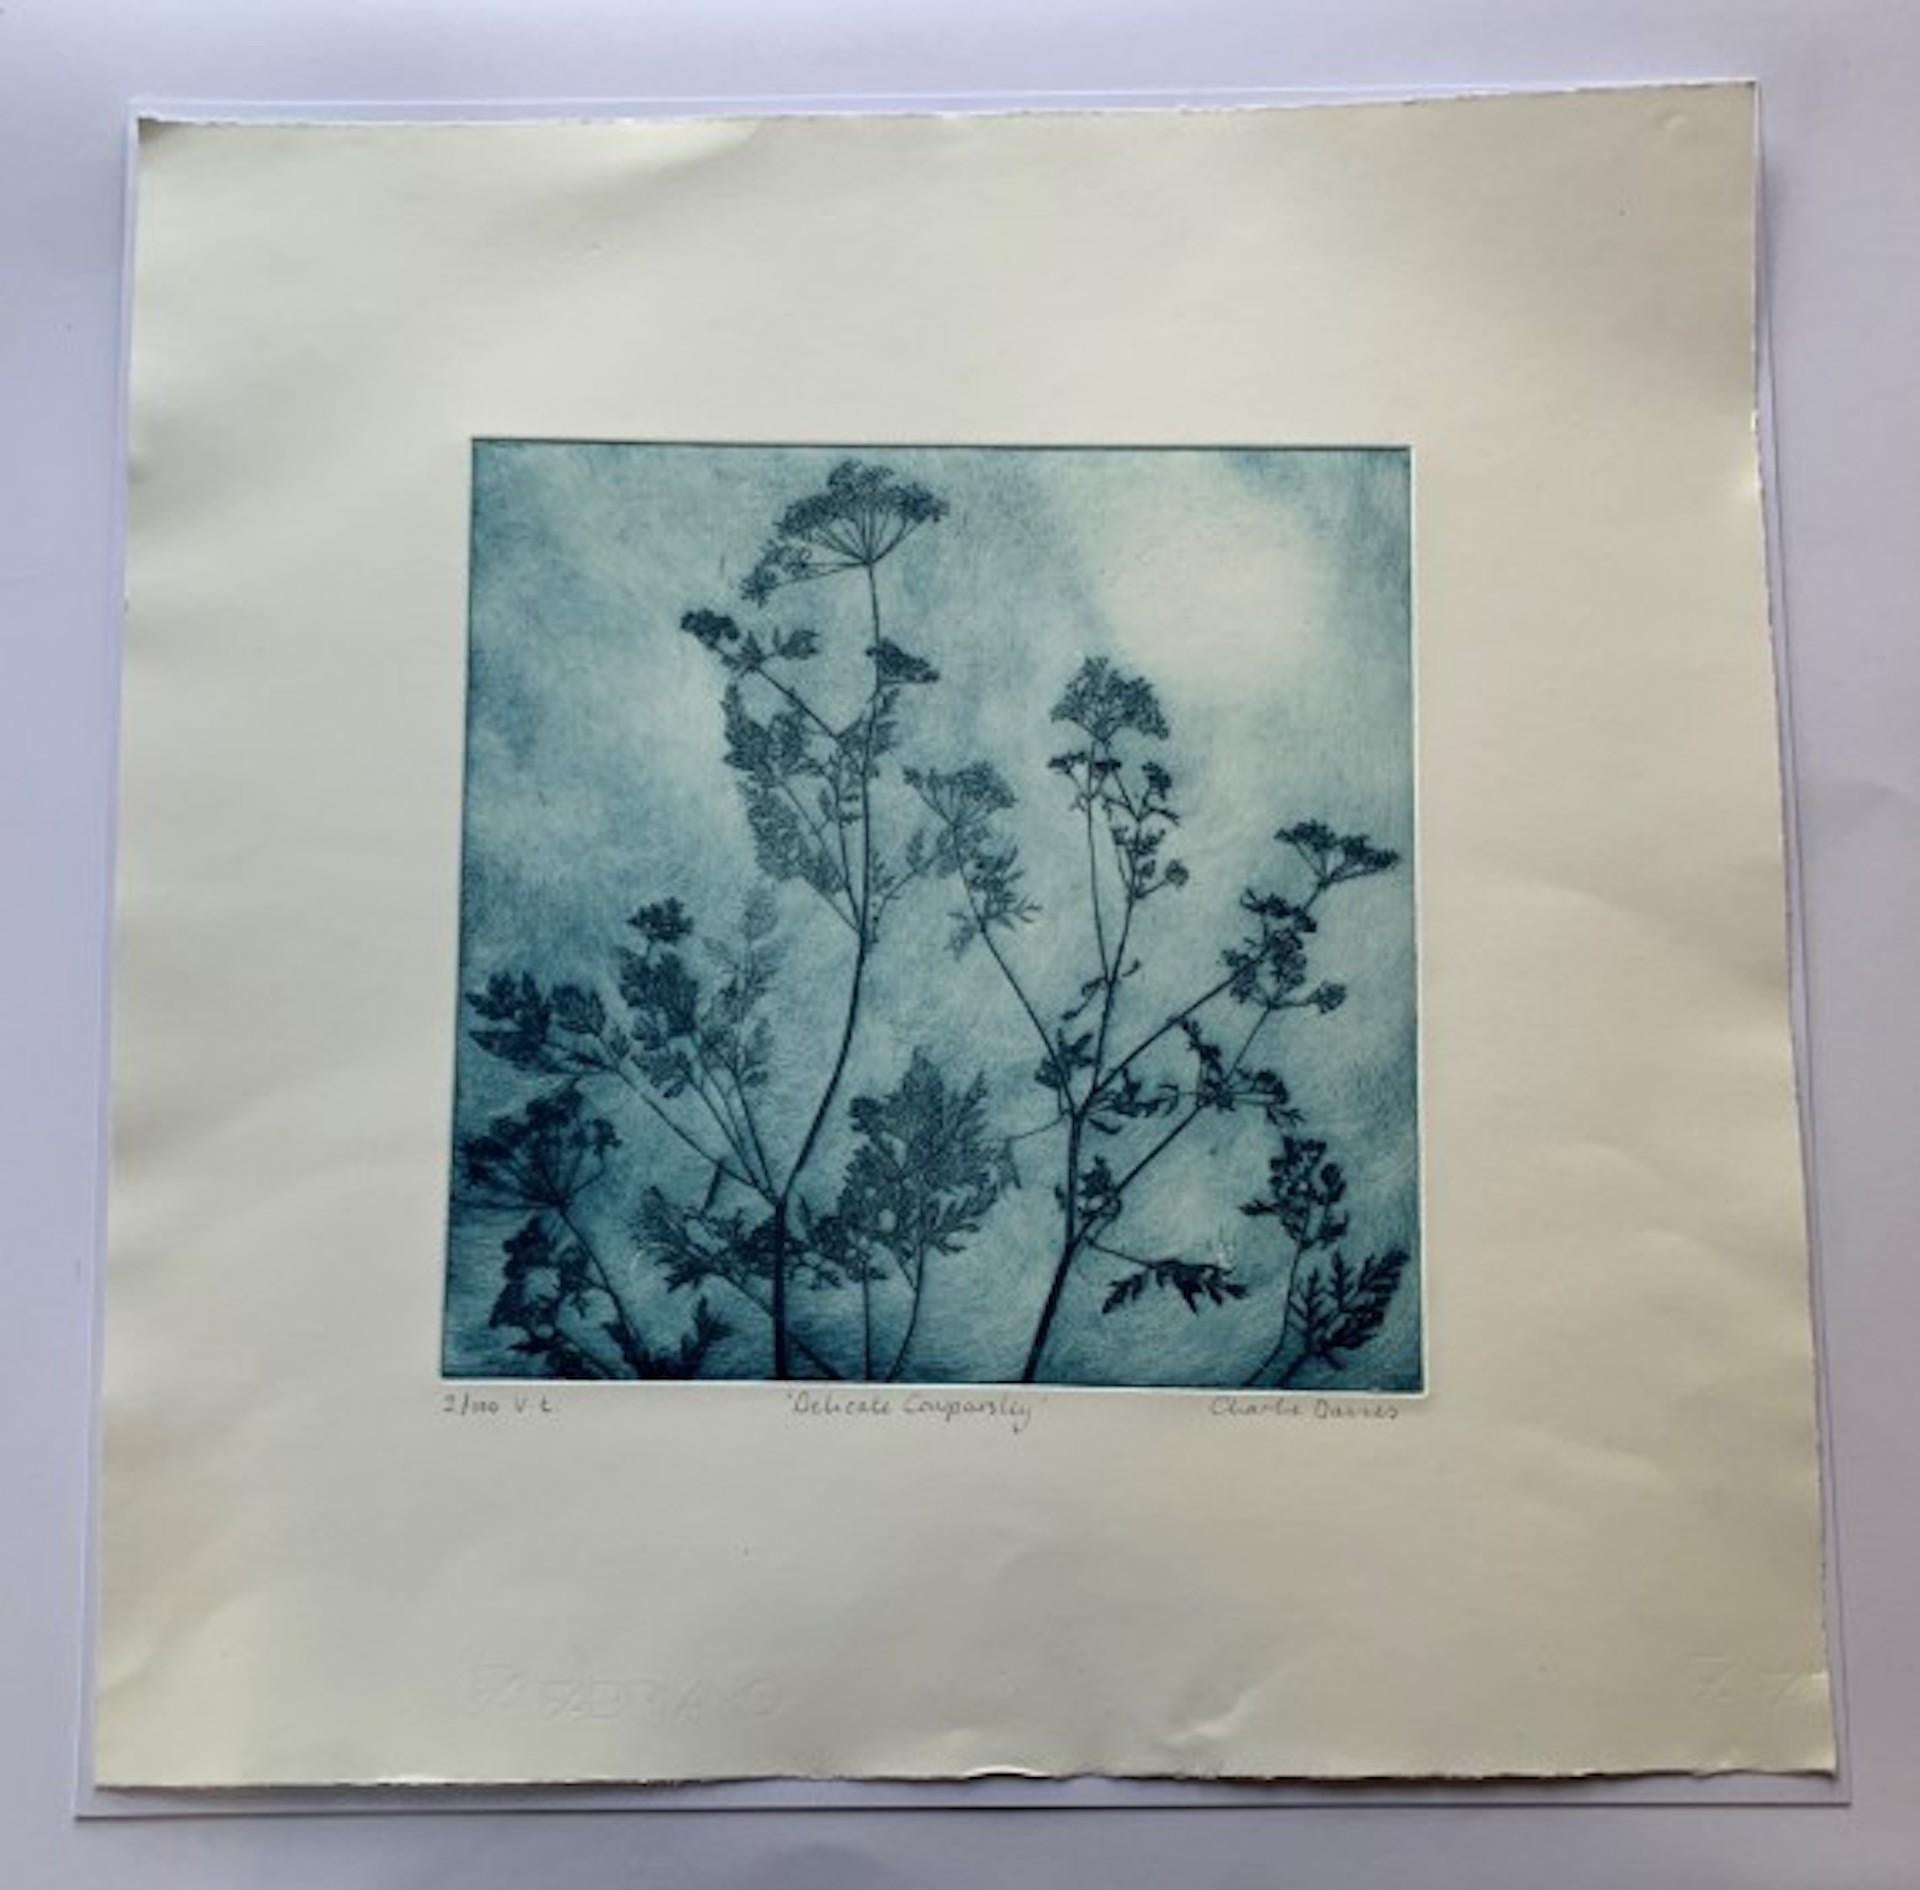 Delicate Cowparsley by Charlie Davies is a limited edition print made using real flowers and fauna from nature to make the etching plate. Part of the printmaking process that Charlie has so tastefully mastered produces slight variations when rubbing